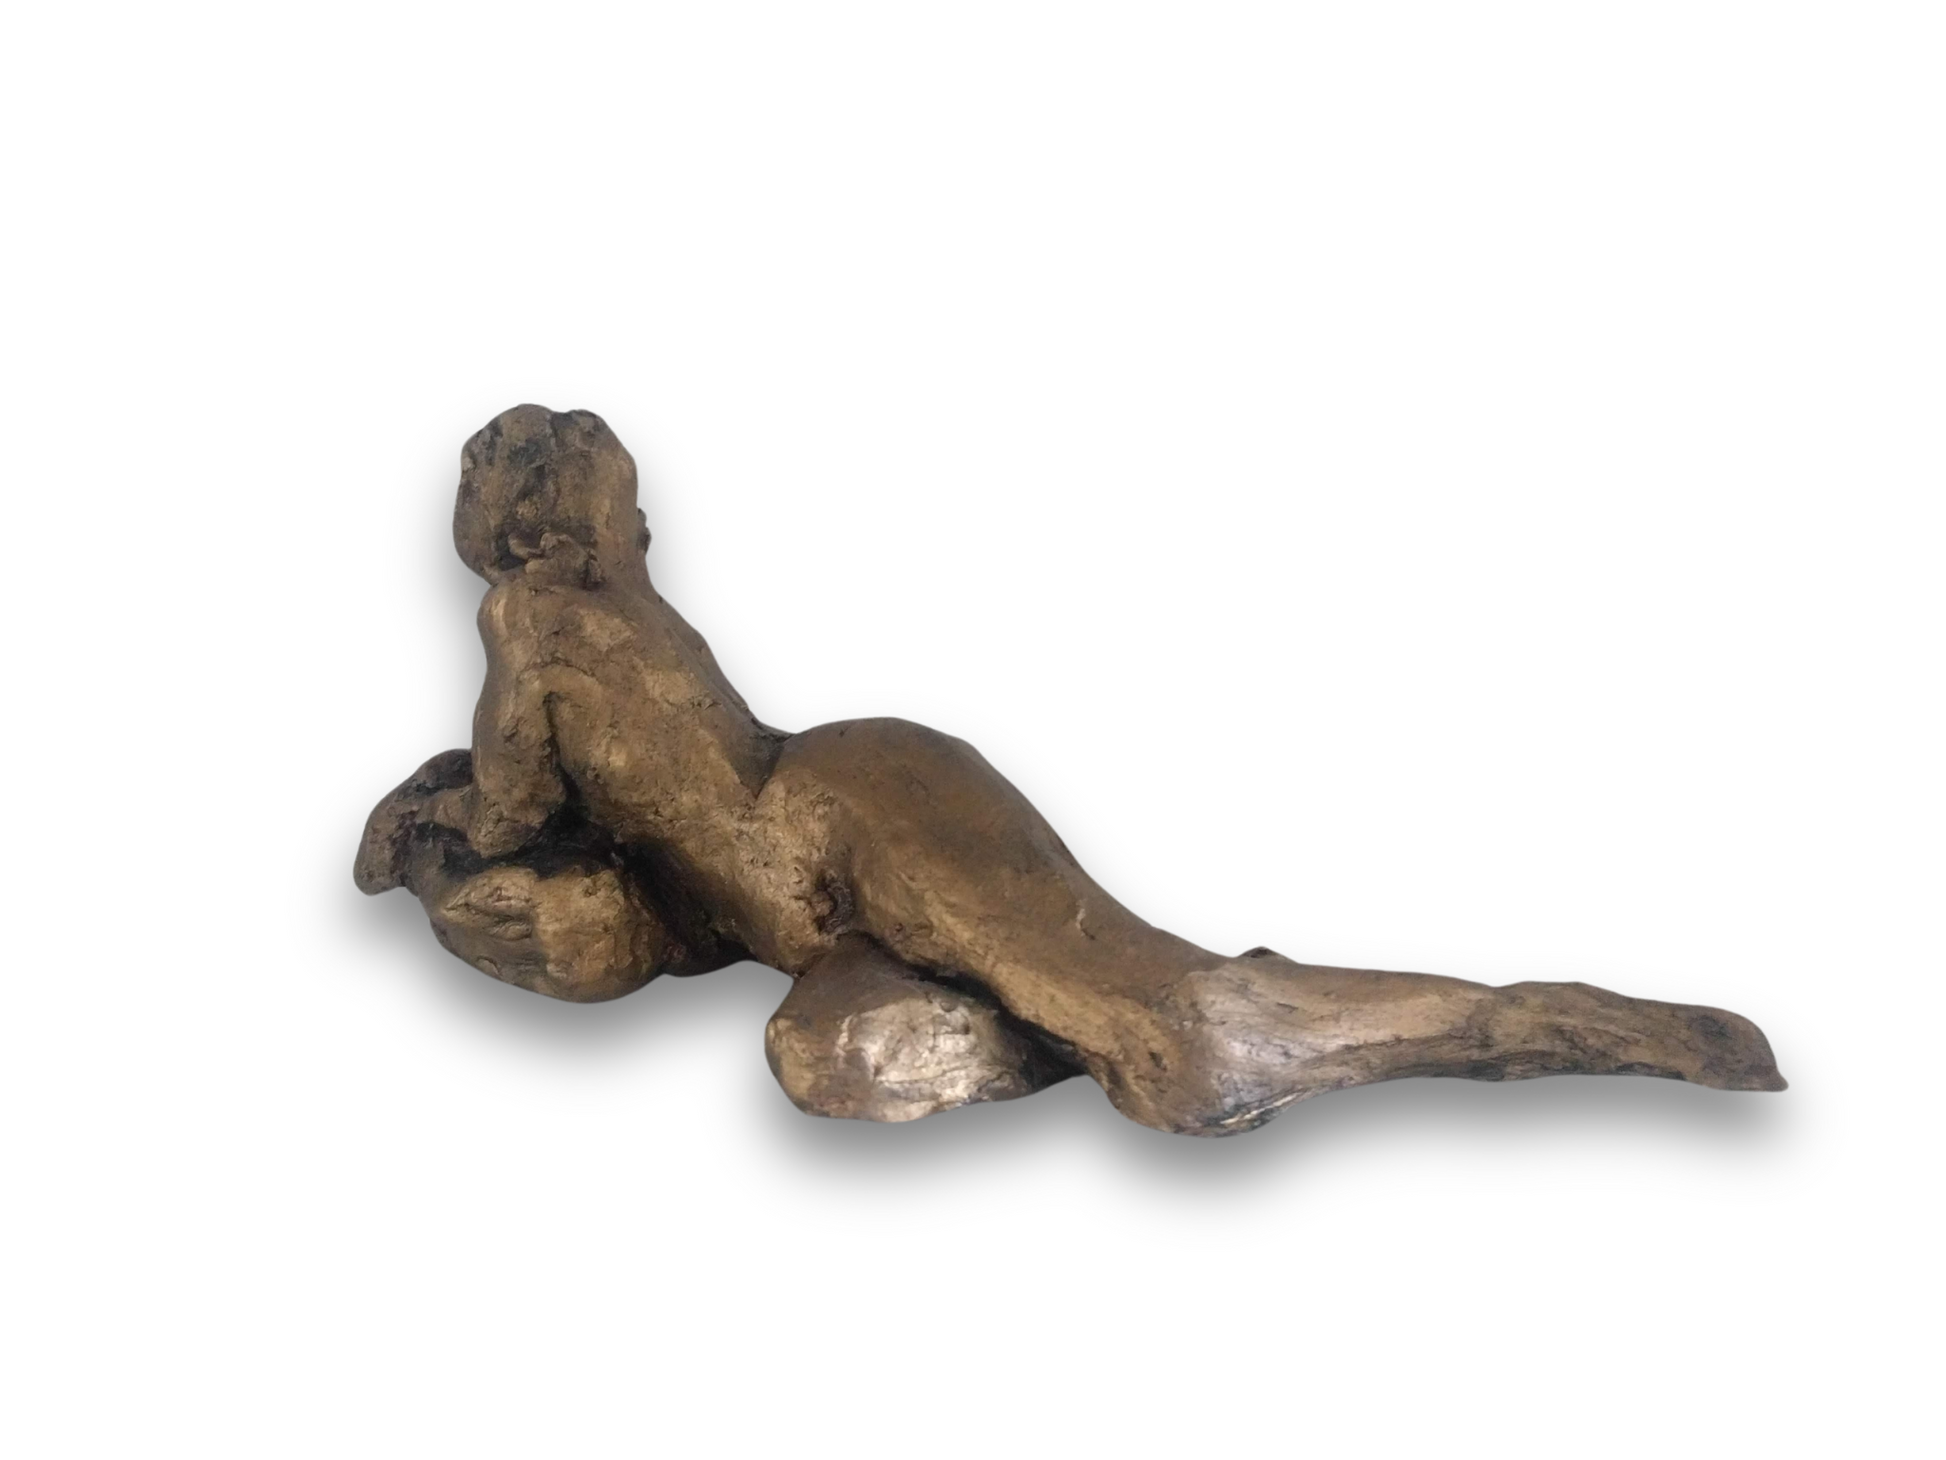 This sculpture is a study of the human form, capturing a reclining figure with an emphasized gesture. It is a beginner's piece in figure sculpture, sculpted in water-based clay, and measures approximately 9 inches in length. The work, showing a figure in a pose that suggests contemplation or rest, was created by Elizabeth Bonura.